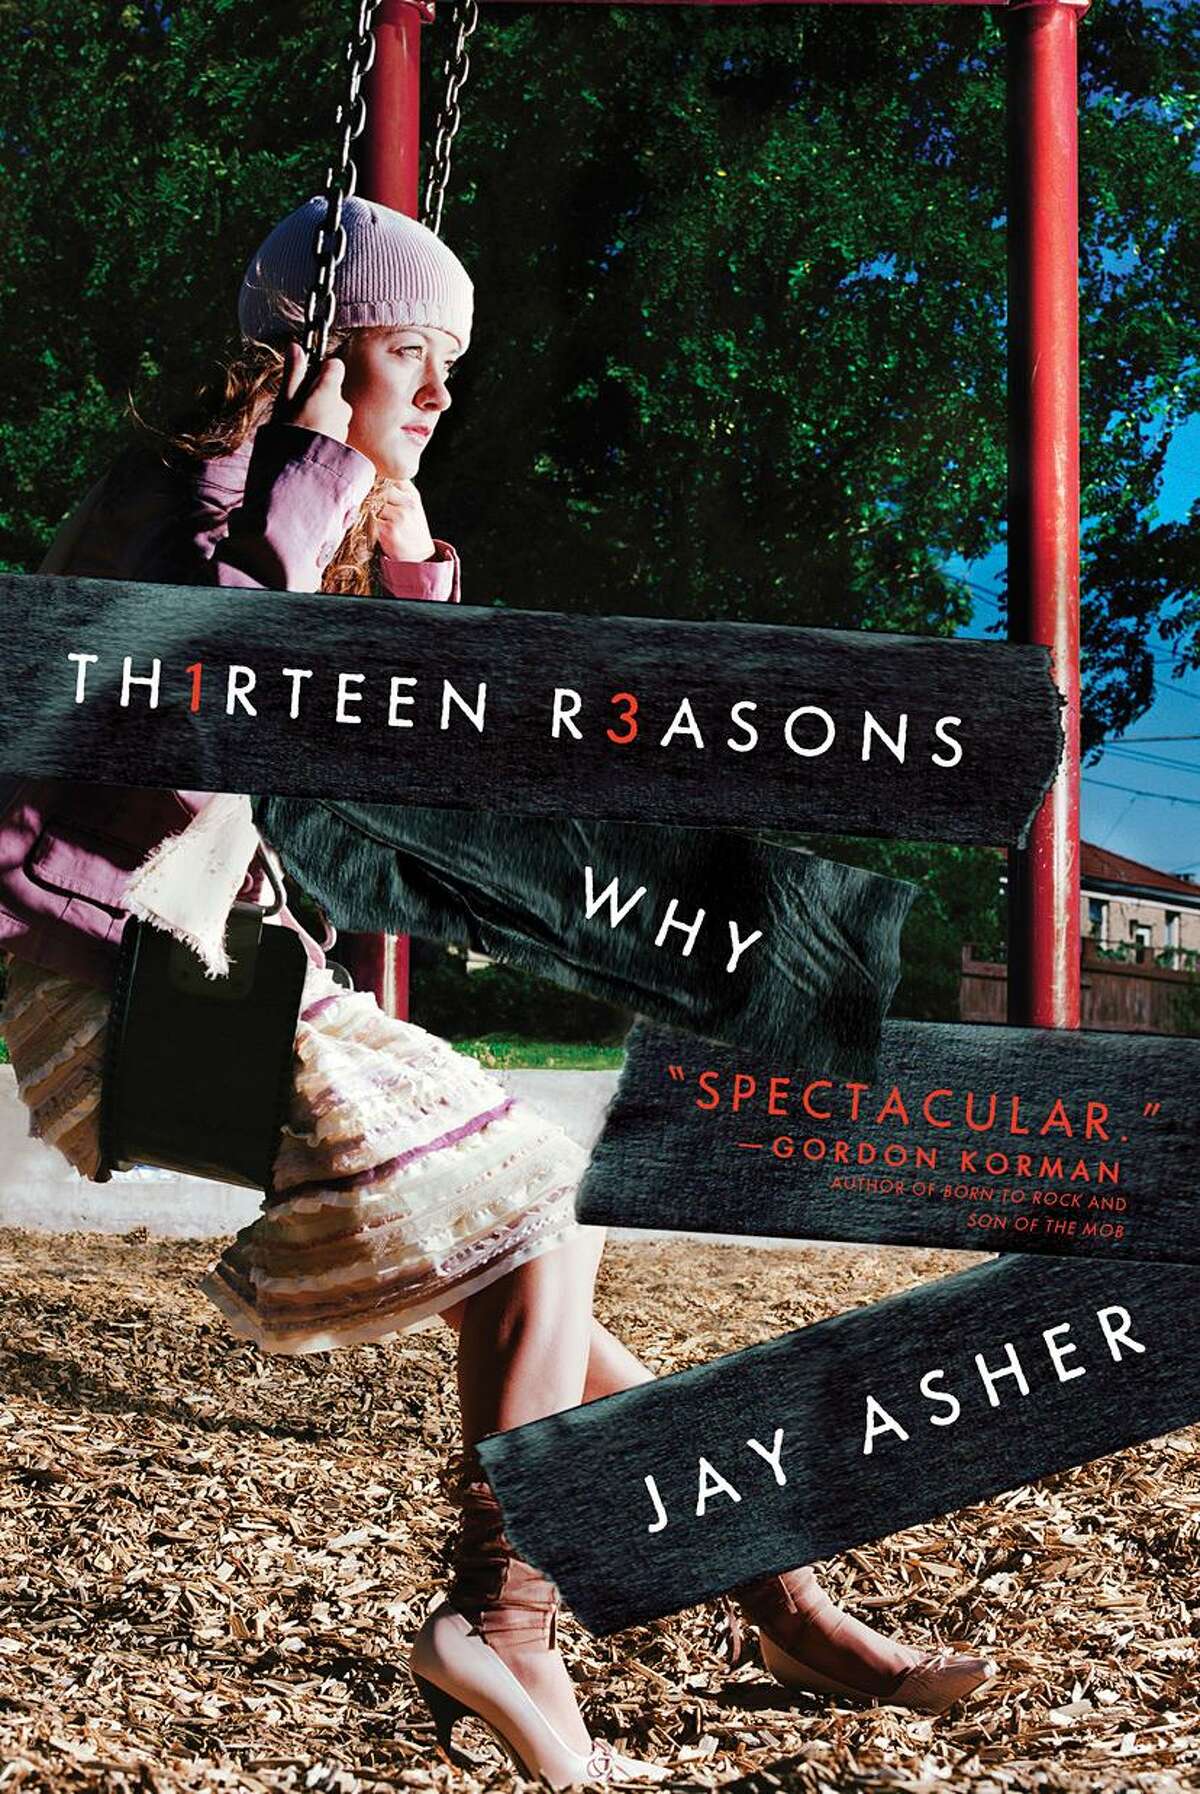 “Thirteen Reasons Why” by Jay Asher